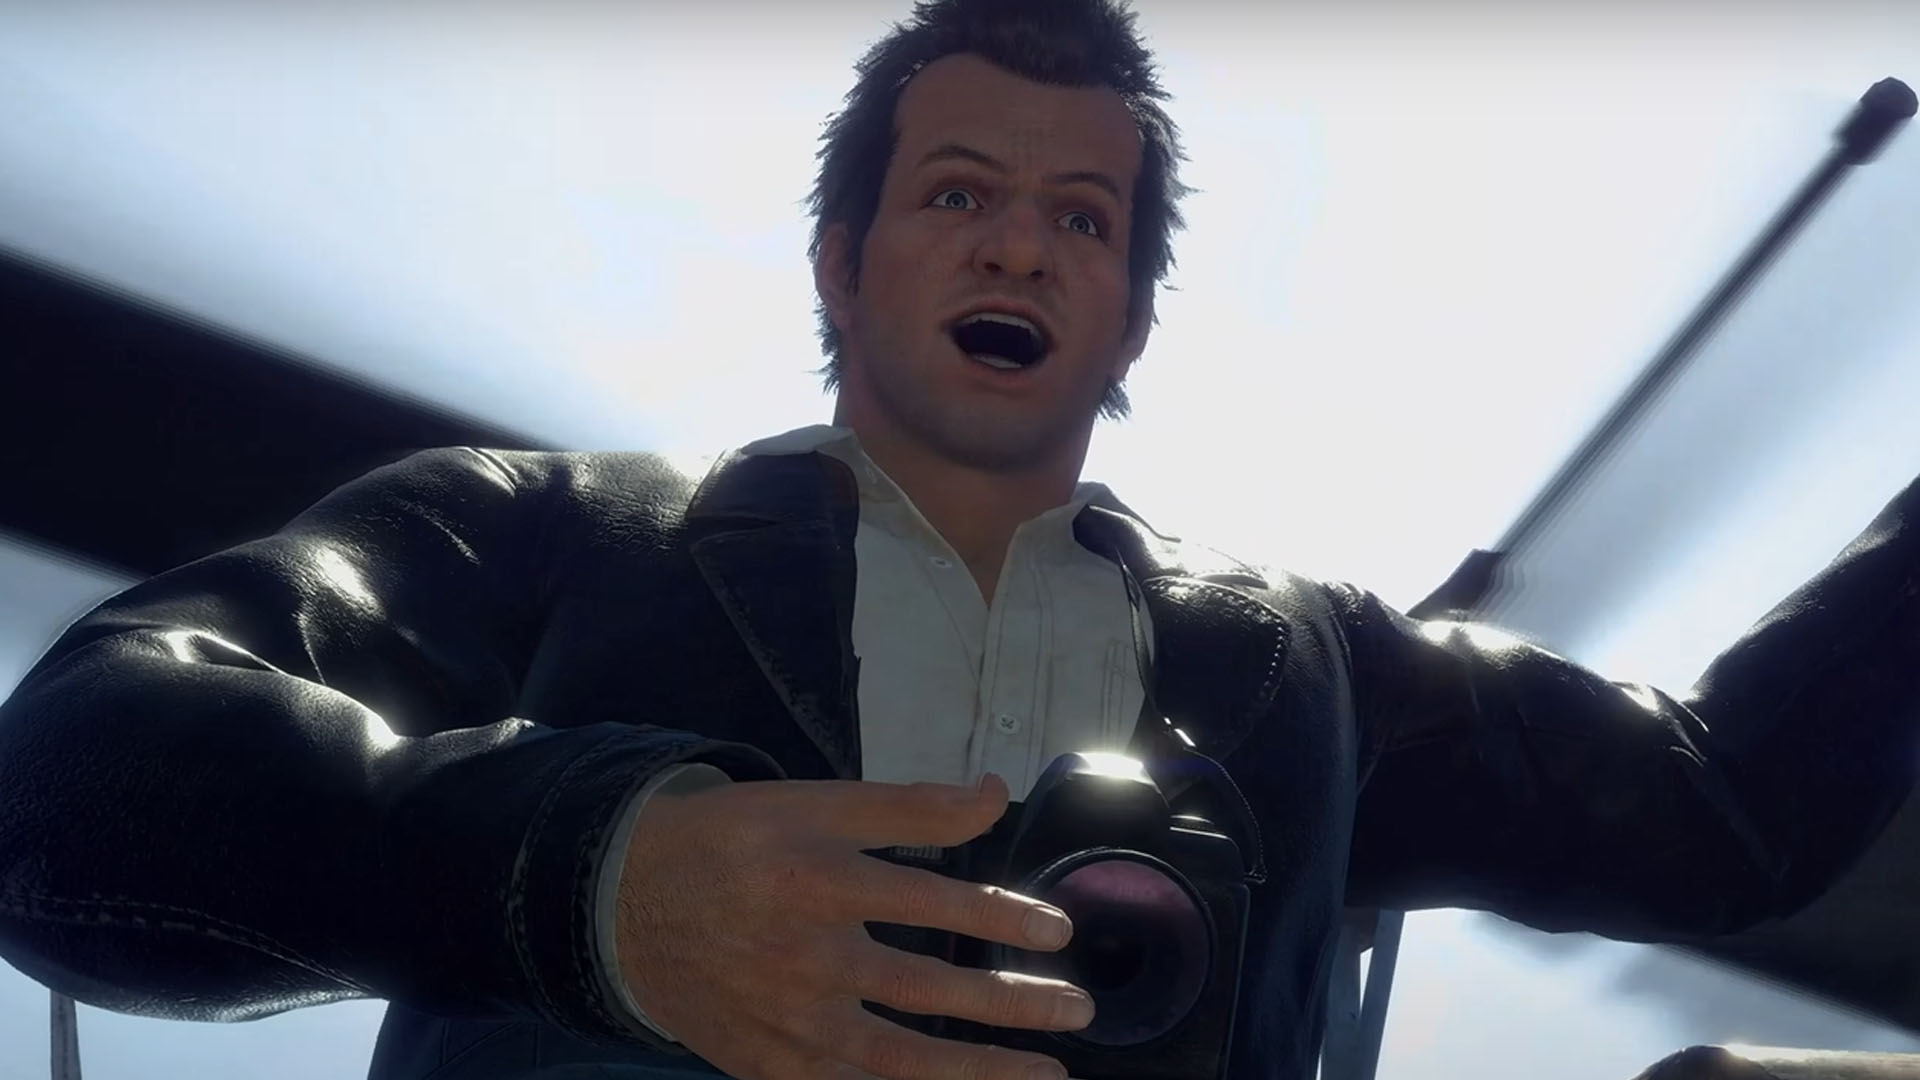 Teaser trailer reveals Dead Rising remaster with new Frank West